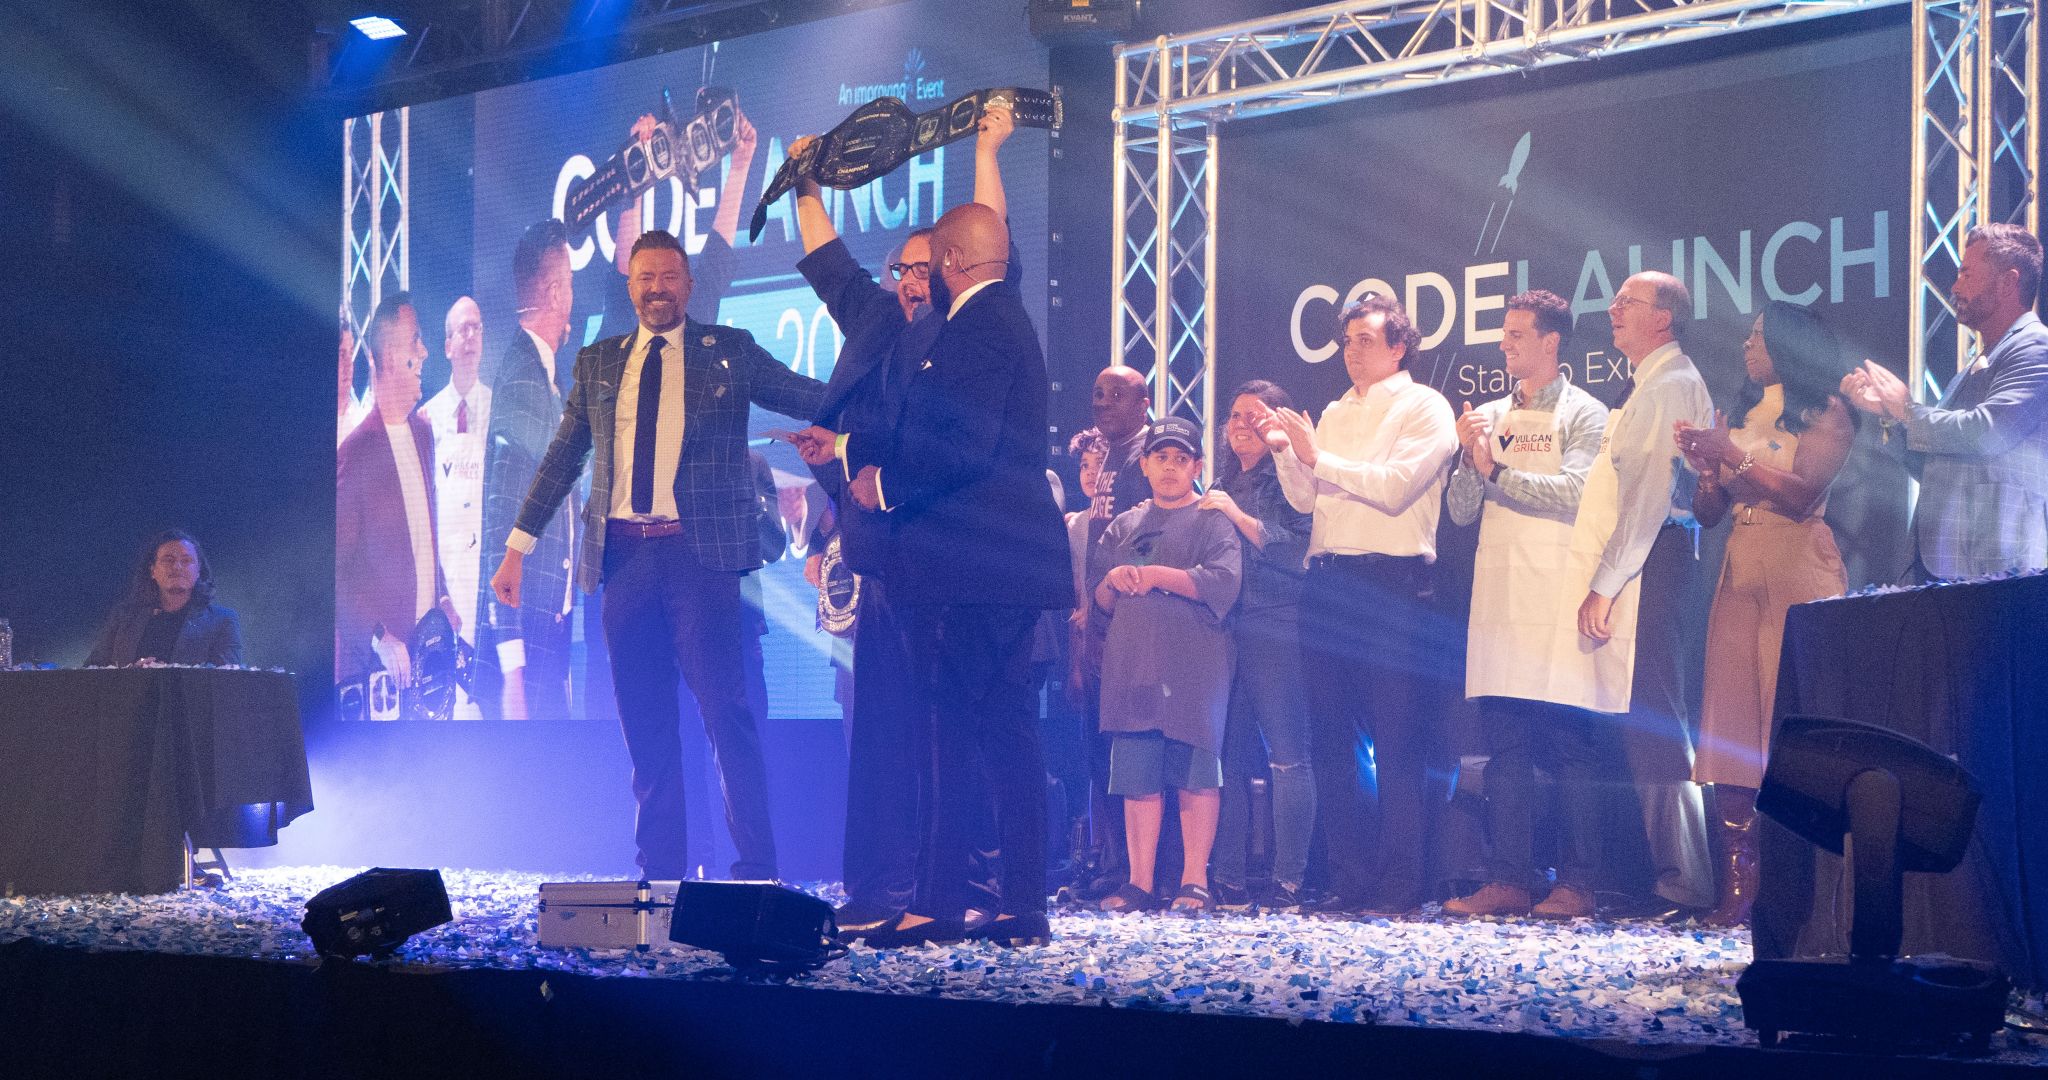 Leverture takes home top prize at Codelaunch DFW 2021